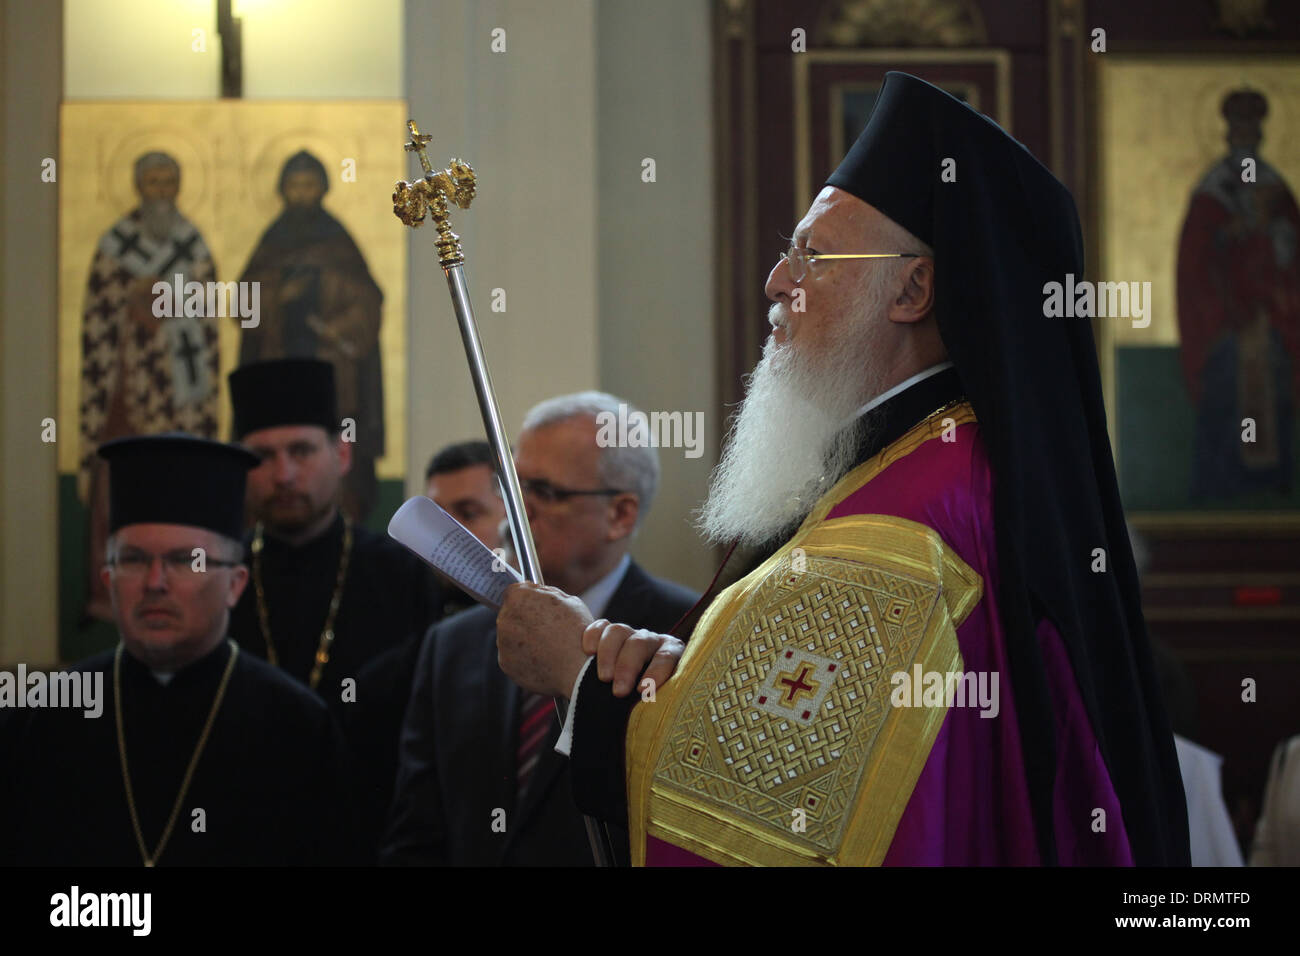 Patriarch Bartholomew I of Constantinople attends an Orthodox religious service during his visit to Prague, Czech Republic. Stock Photo